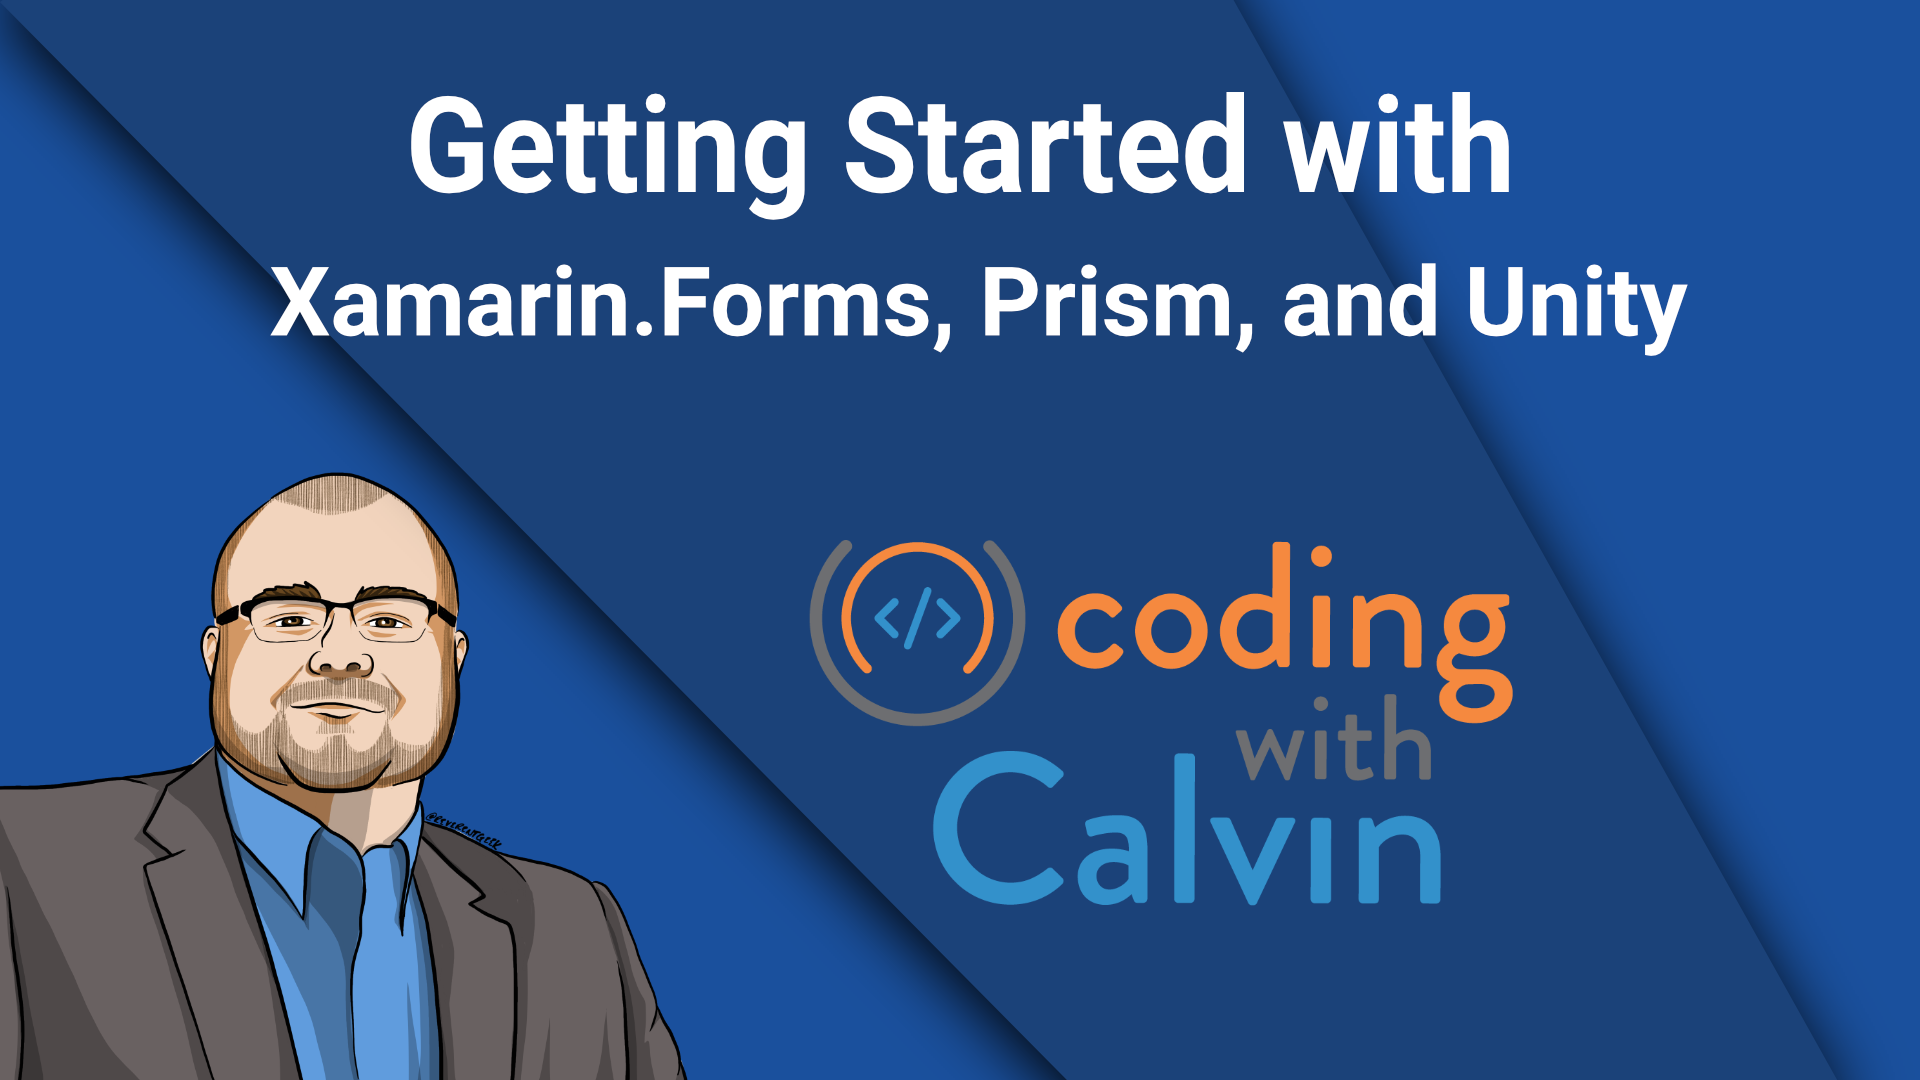 Getting Started with Xamarin.Forms, Prism, and Unity